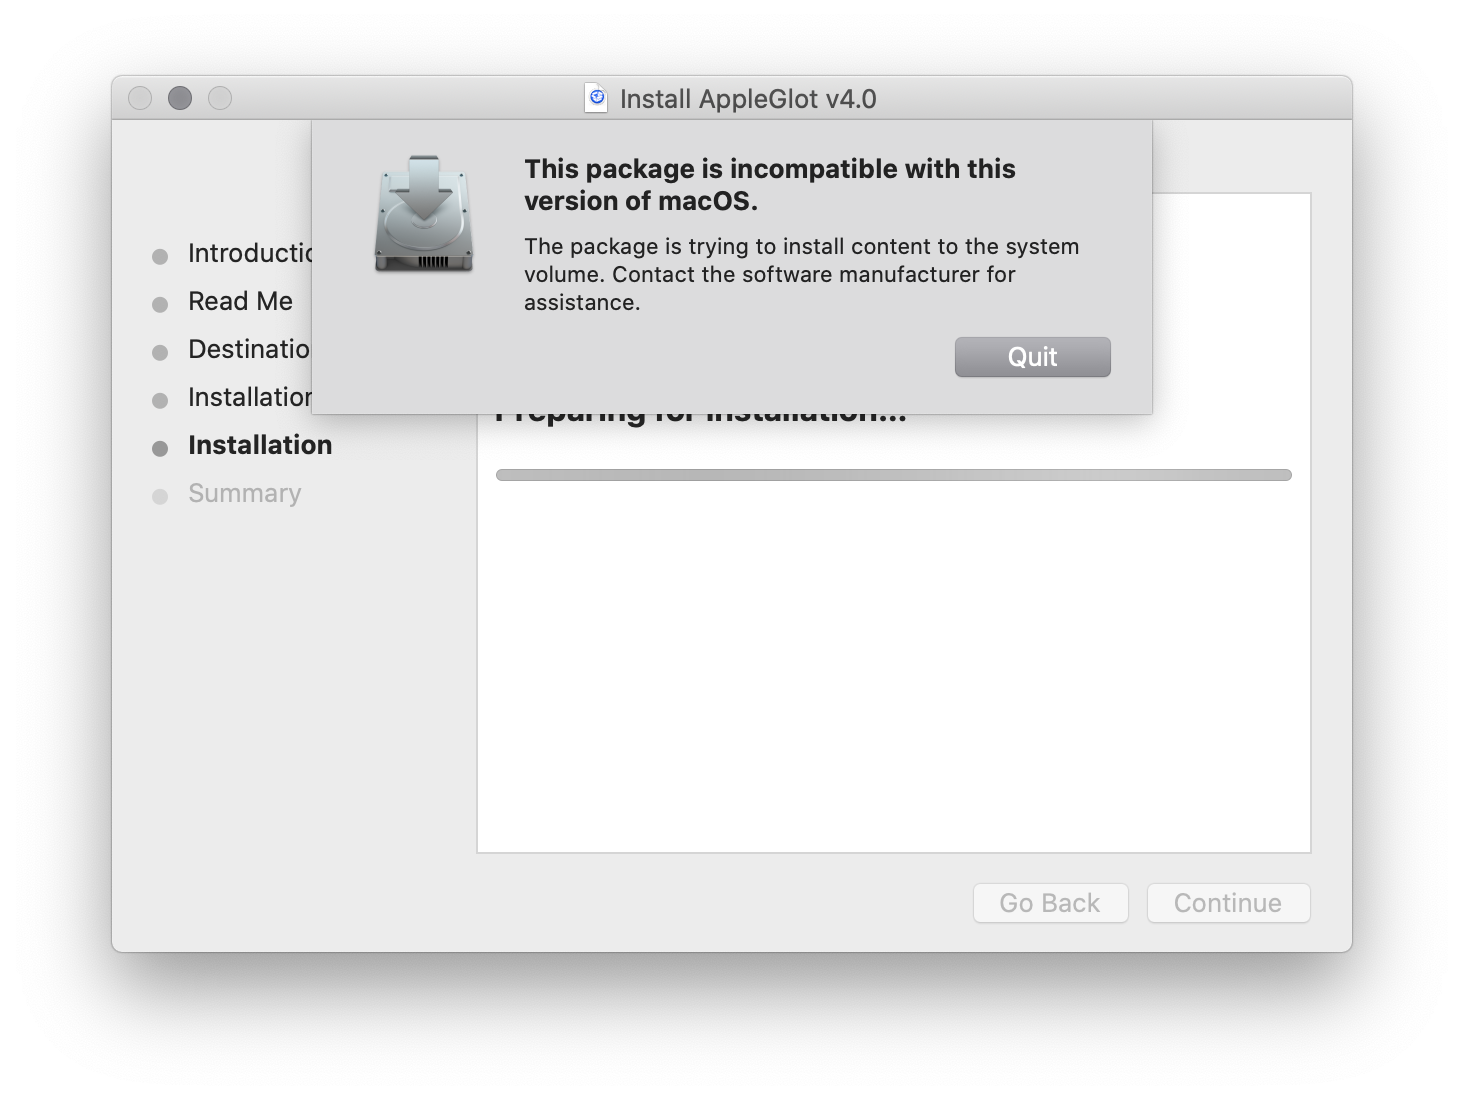 Screenshot of Installer on Mac. The text reads: Install AppleGlot v4. This package is incompatible with this version of macOS.